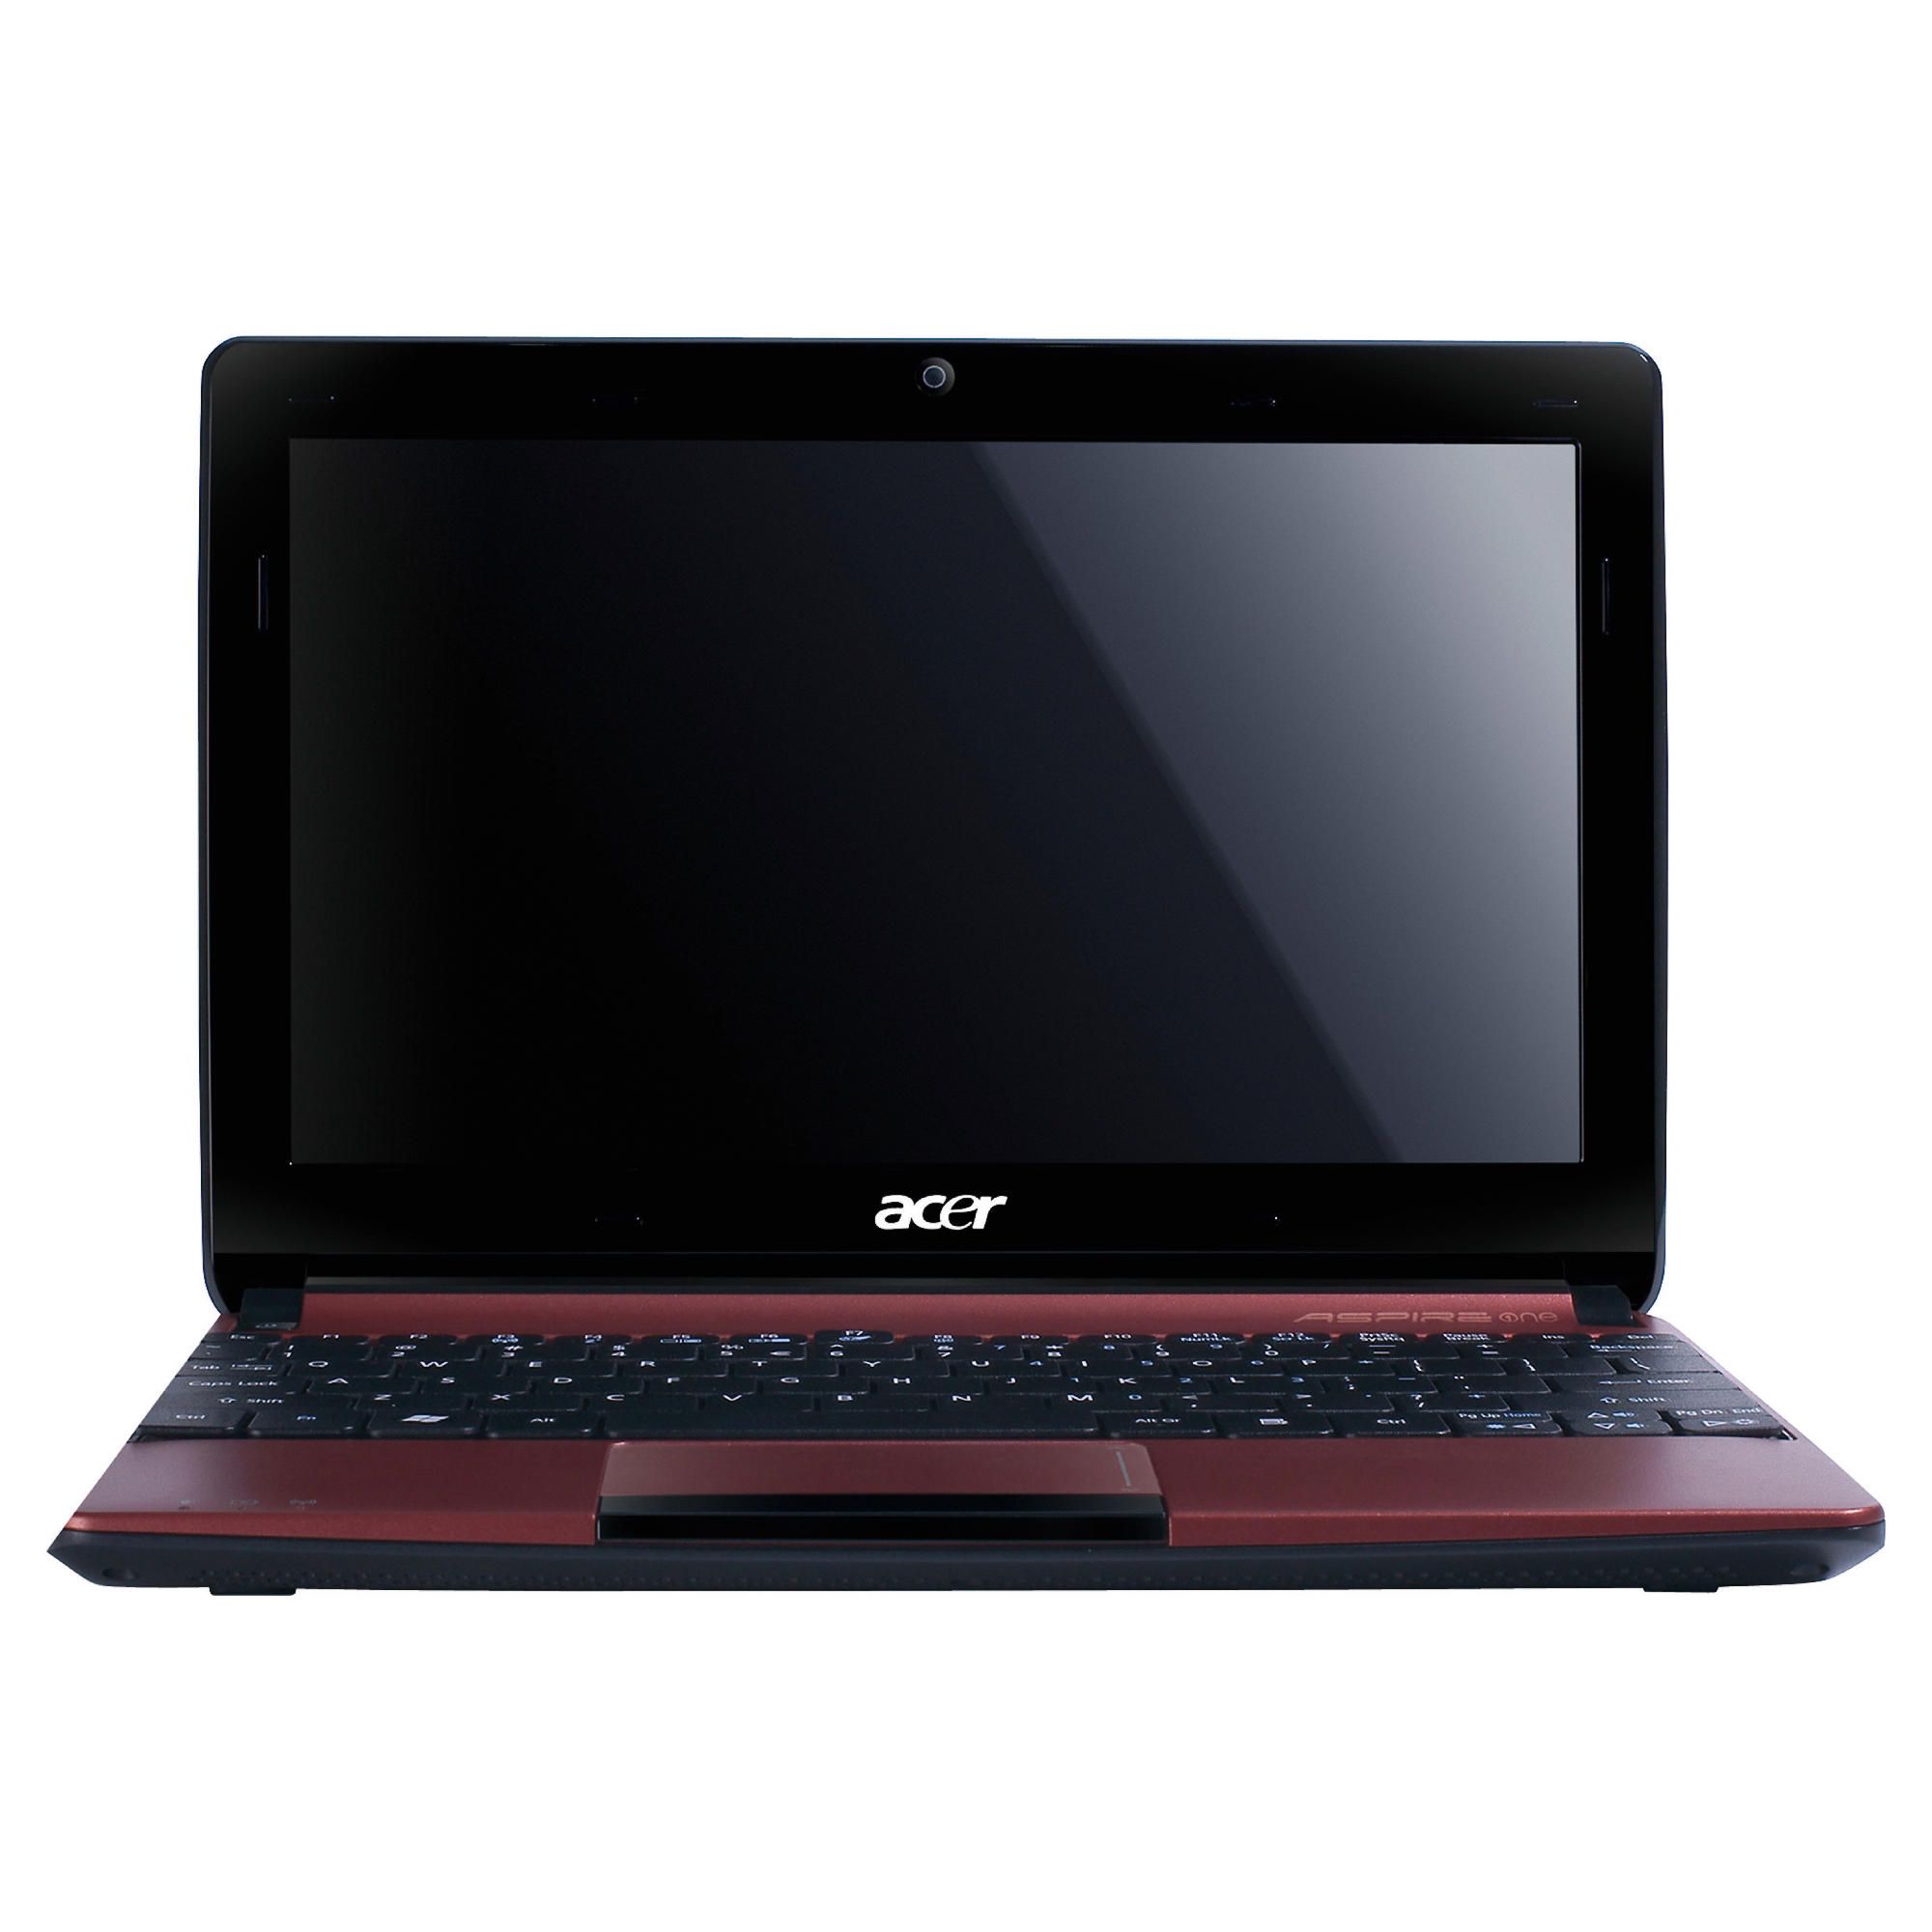 Acer Aspire One 722 Netbook (AMD C50, 2GB, 320GB, 11.6'' Display) Red at Tesco Direct